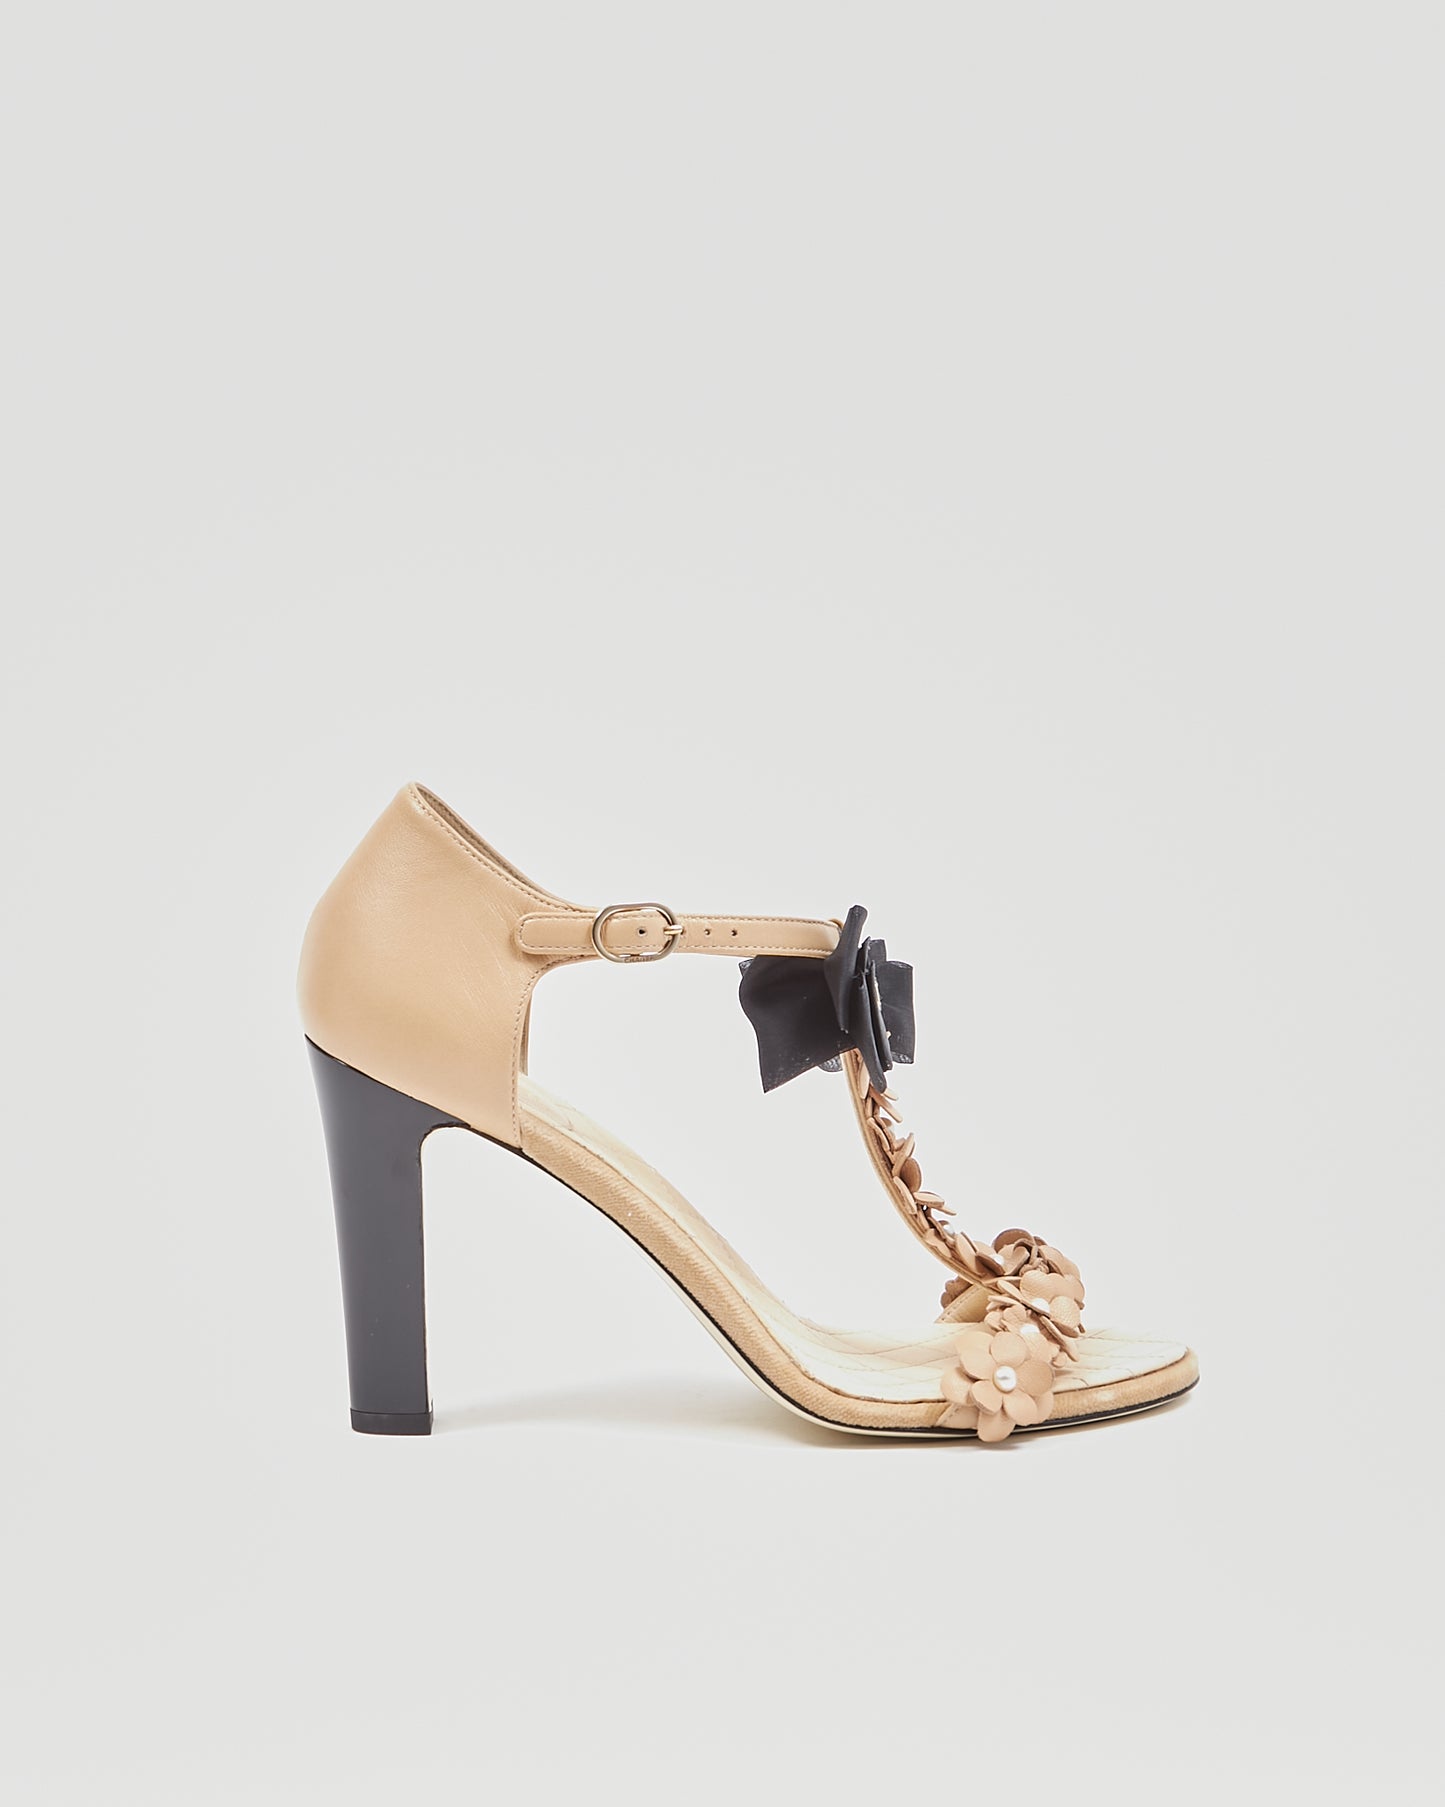 Chanel Beige with Black Bow Accent Sandal Heels - 38